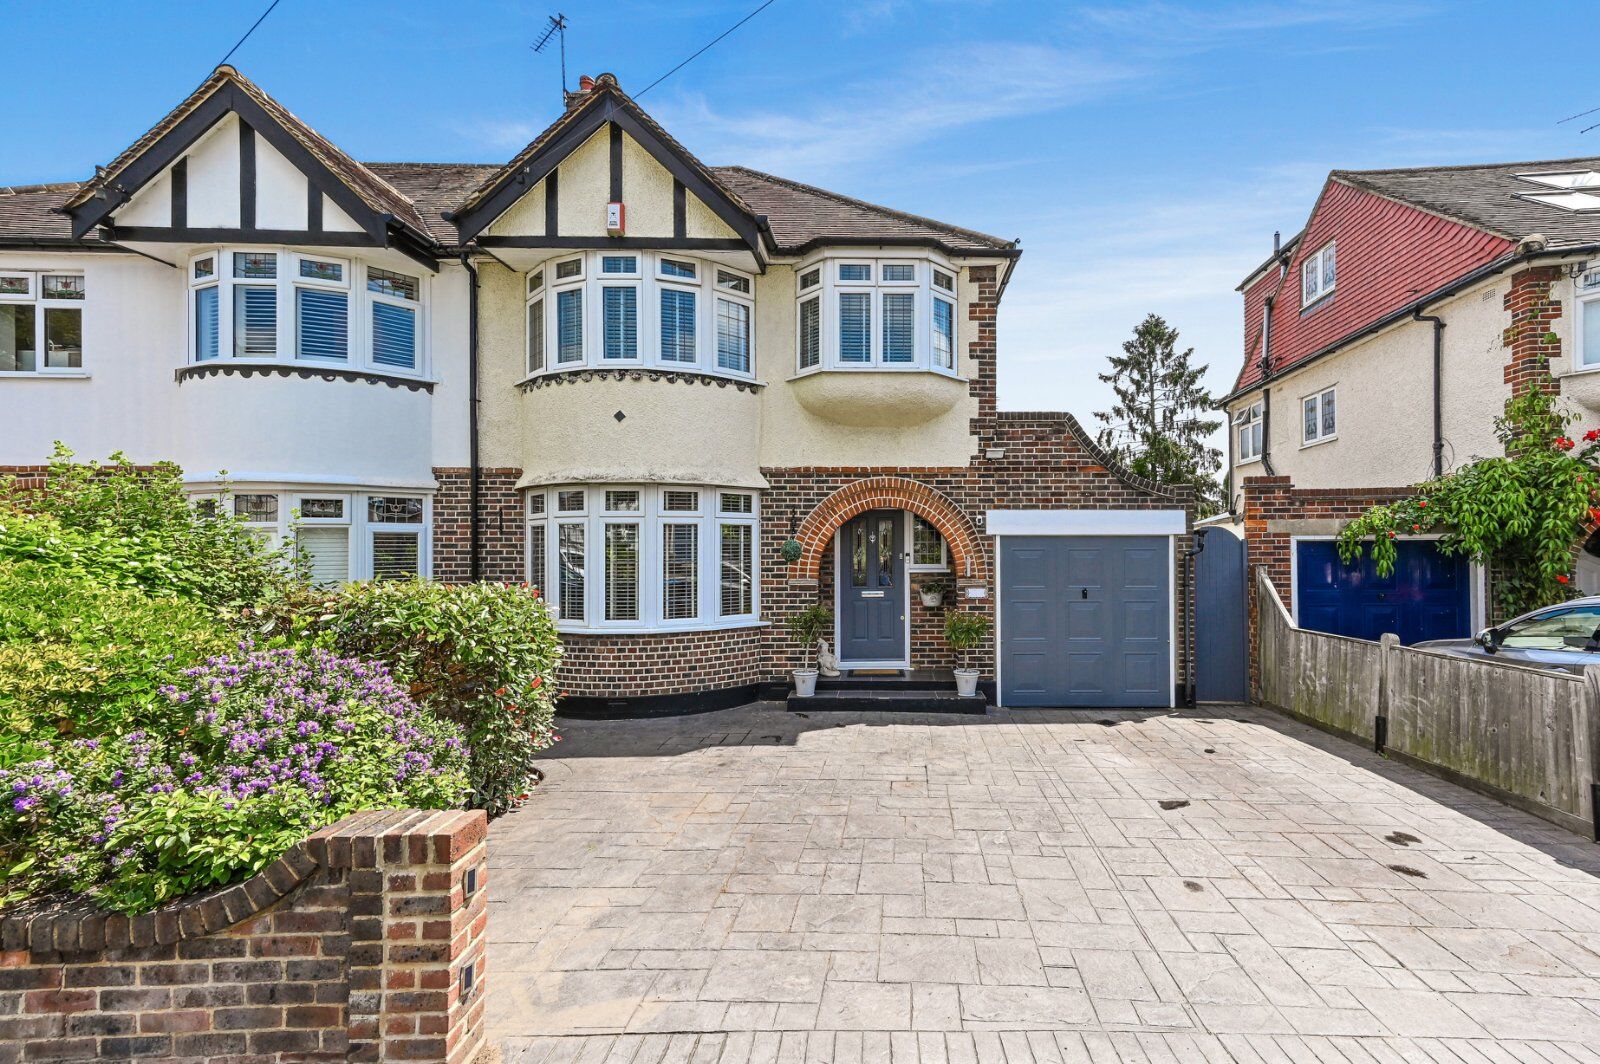 3 bedroom semi detached house for sale Queens Drive, Surbiton, KT5, main image